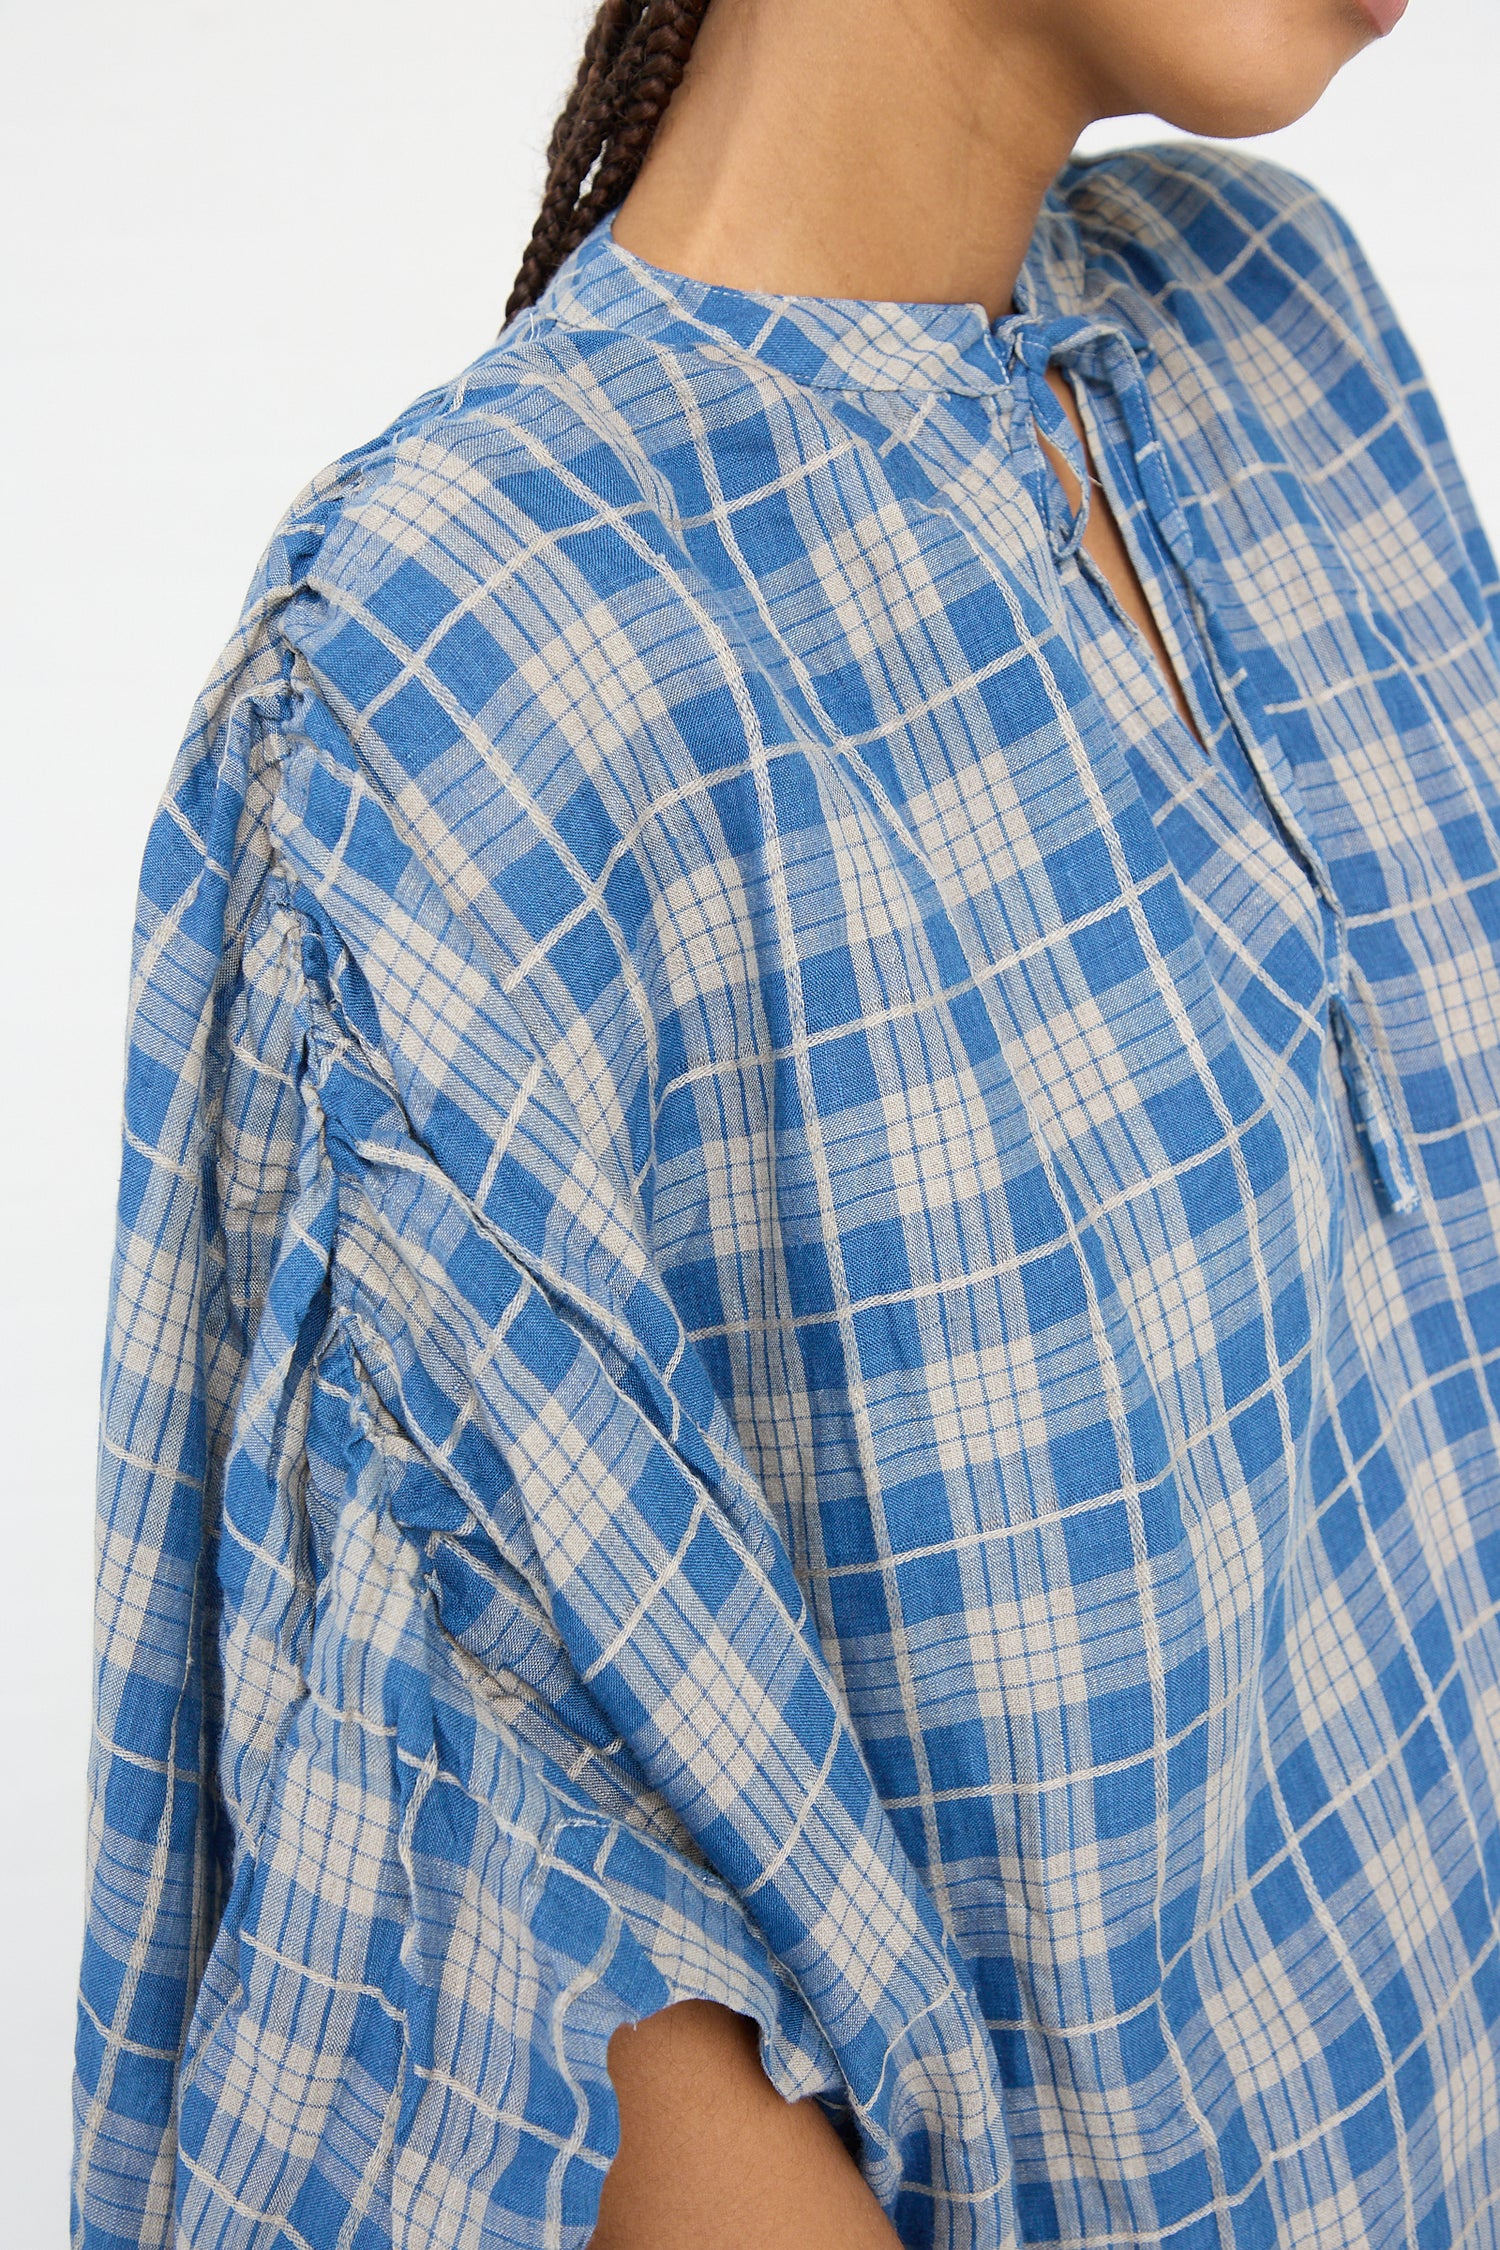 Close-up of a person wearing a Linen Check Dress in Dark Indigo and Natural Linen by Ichi Antiquités with stitched details on the shoulder.